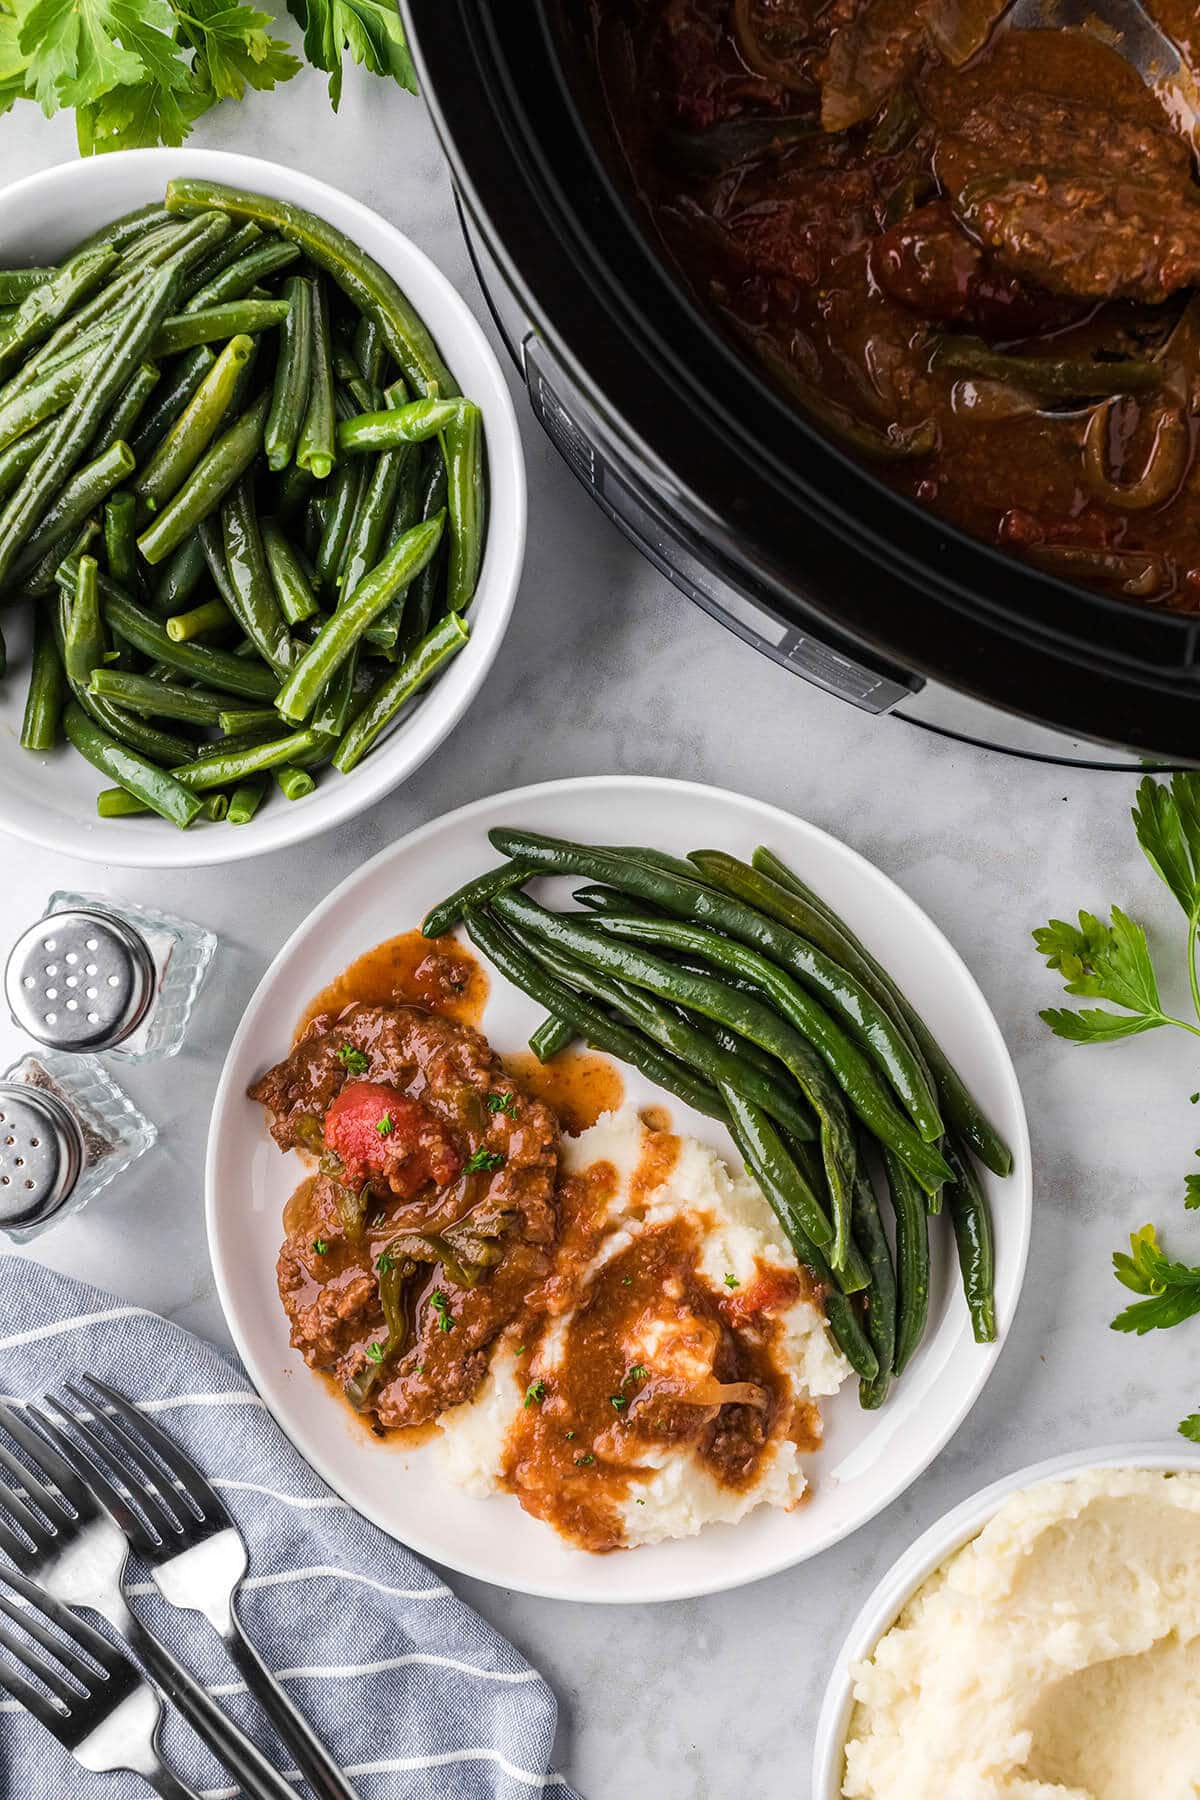 Swiss steak and potatoes topped with gravy and green beans on a plate.